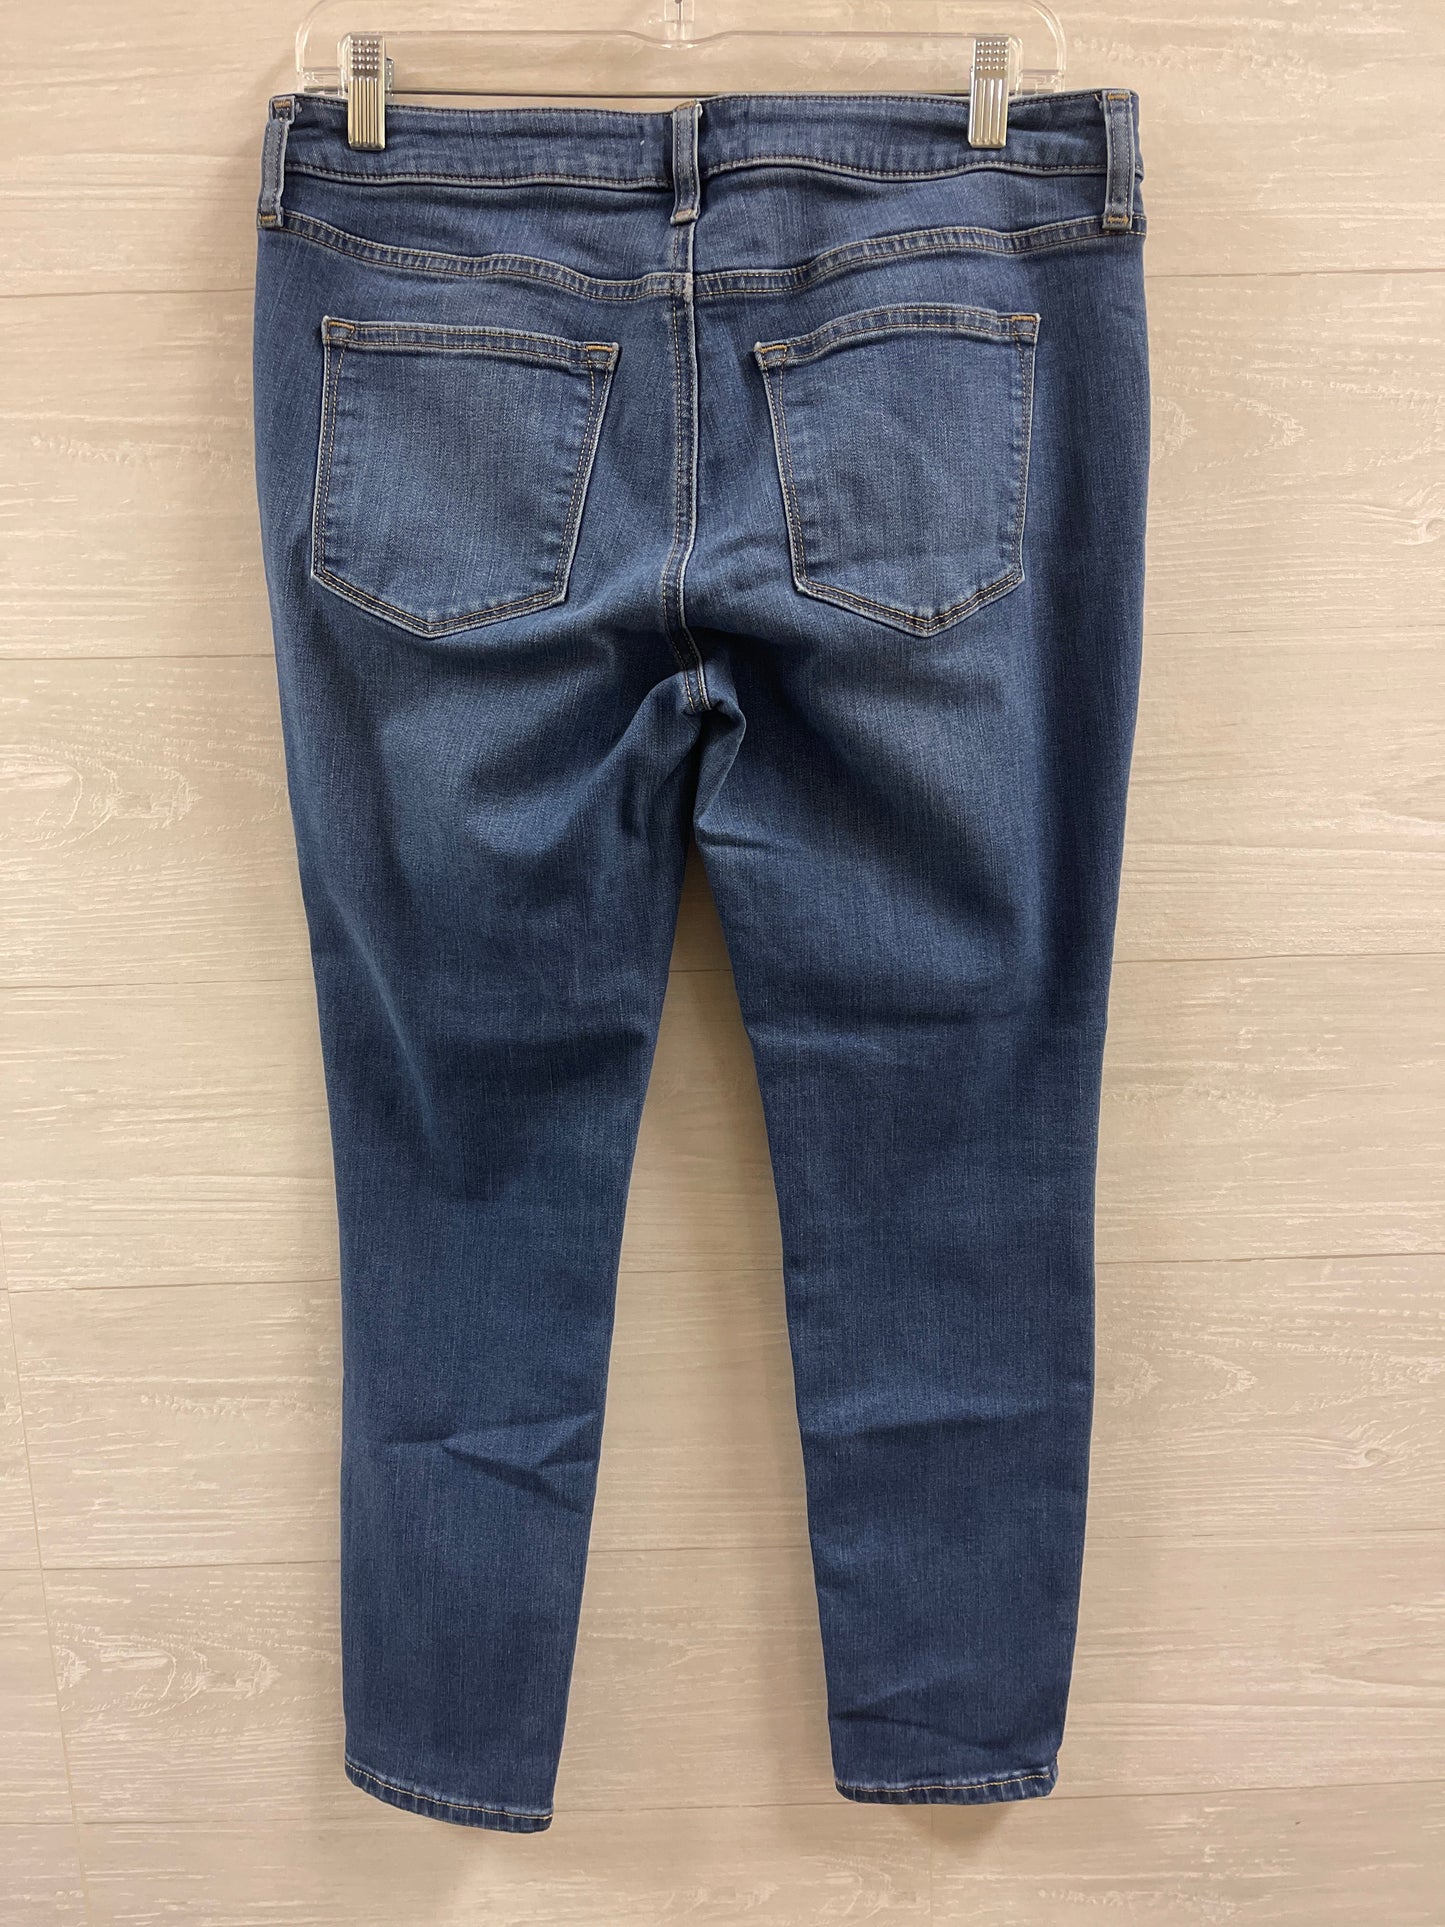 Jeans Skinny By Sonoma  Size: 10petite